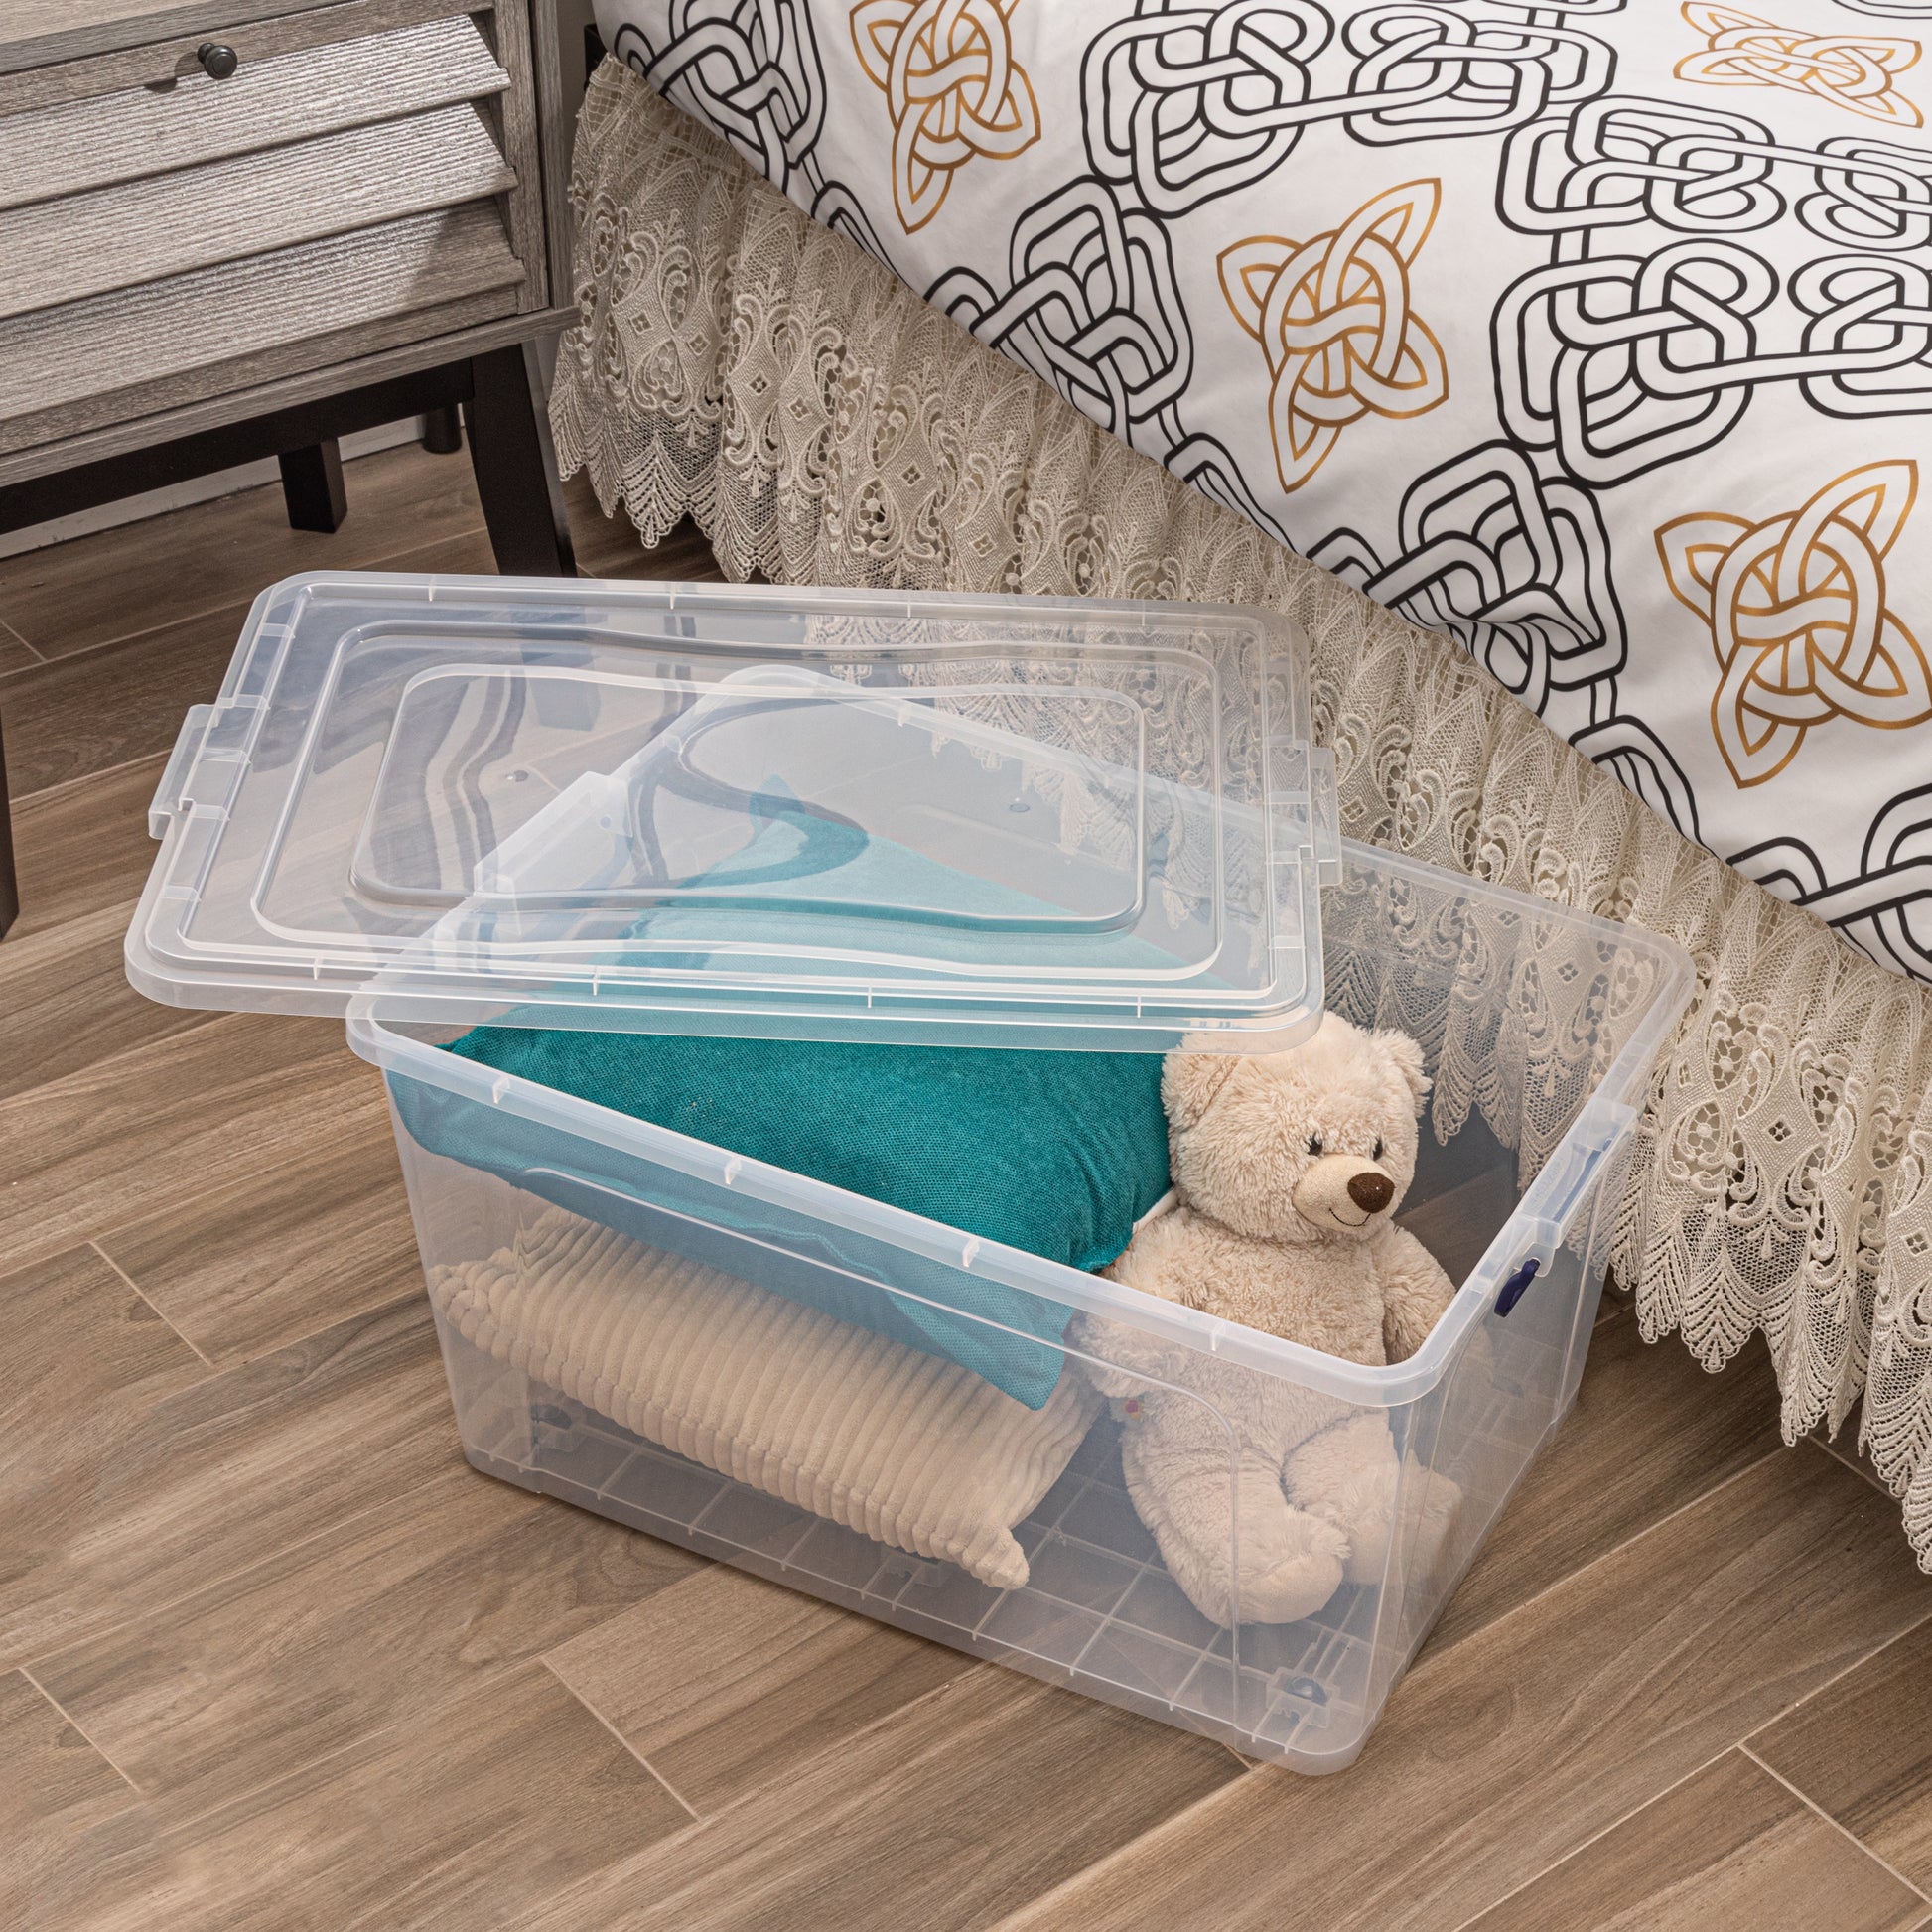 Superio Clear Storage Container with Wheels, Stackable Plastic Storage Bin,  Durable Latch Box (62 Quart) 